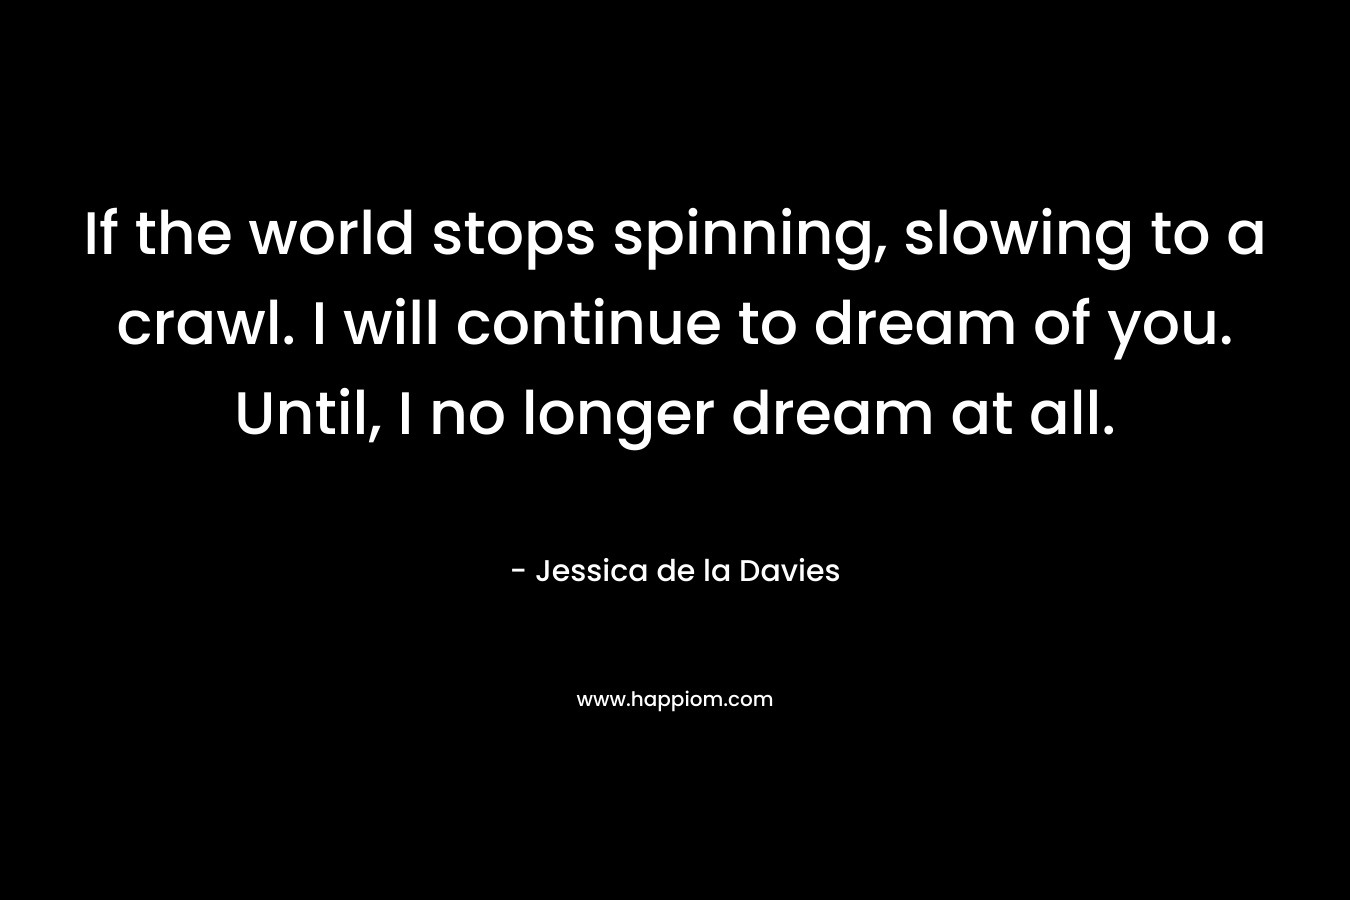 If the world stops spinning, slowing to a crawl. I will continue to dream of you. Until, I no longer dream at all. – Jessica de la Davies